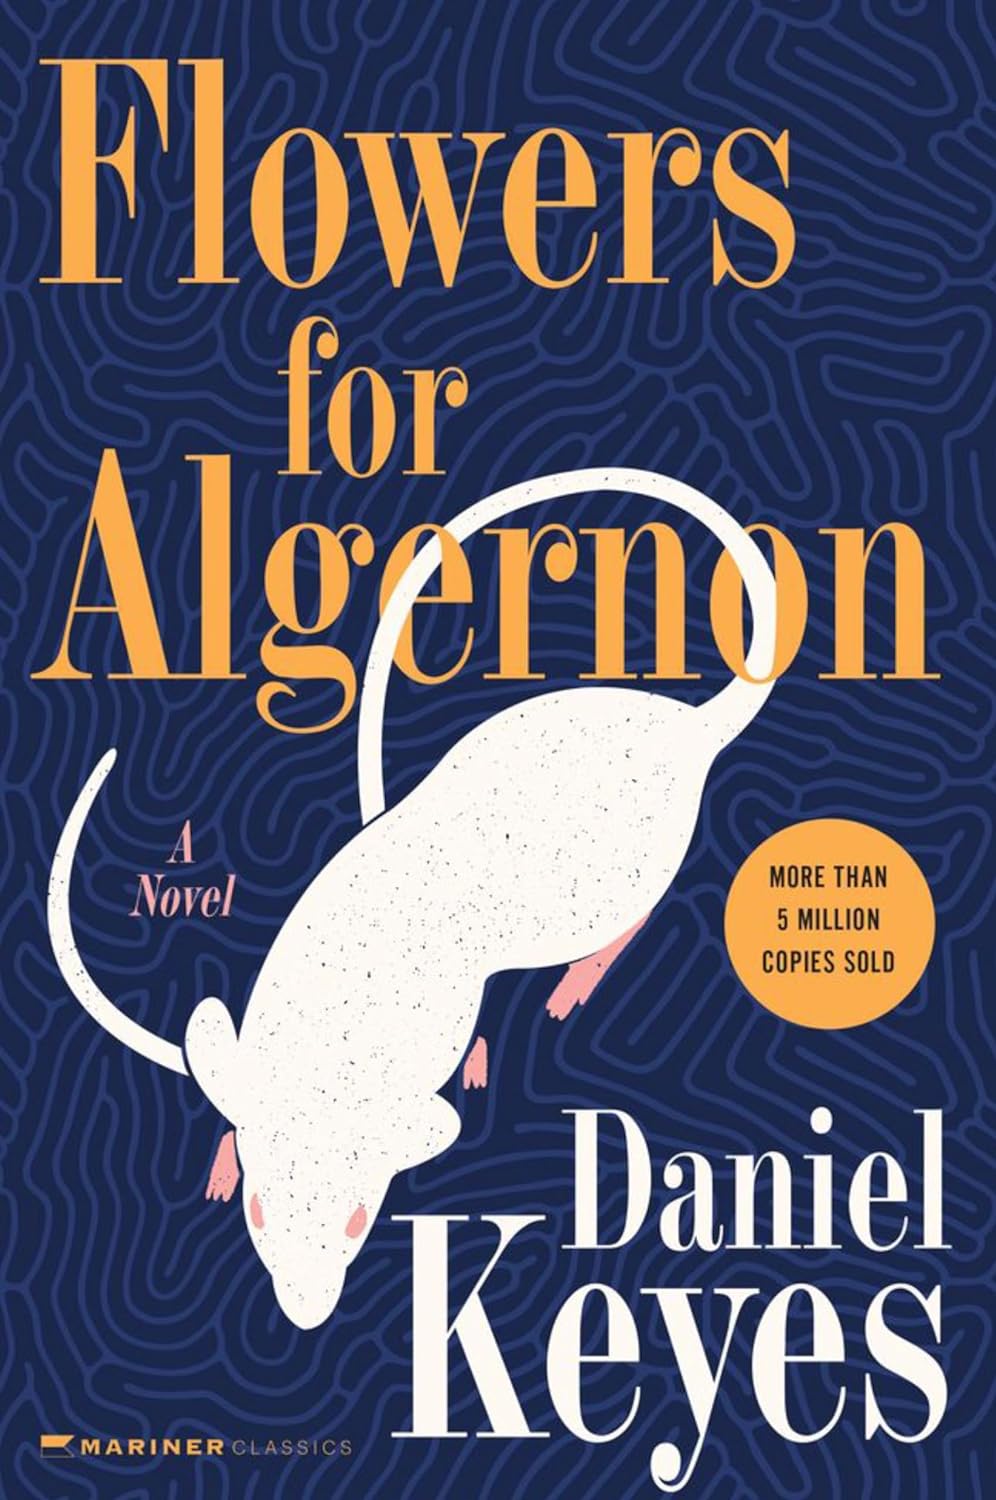 Book cover of Flowers for Algernon.